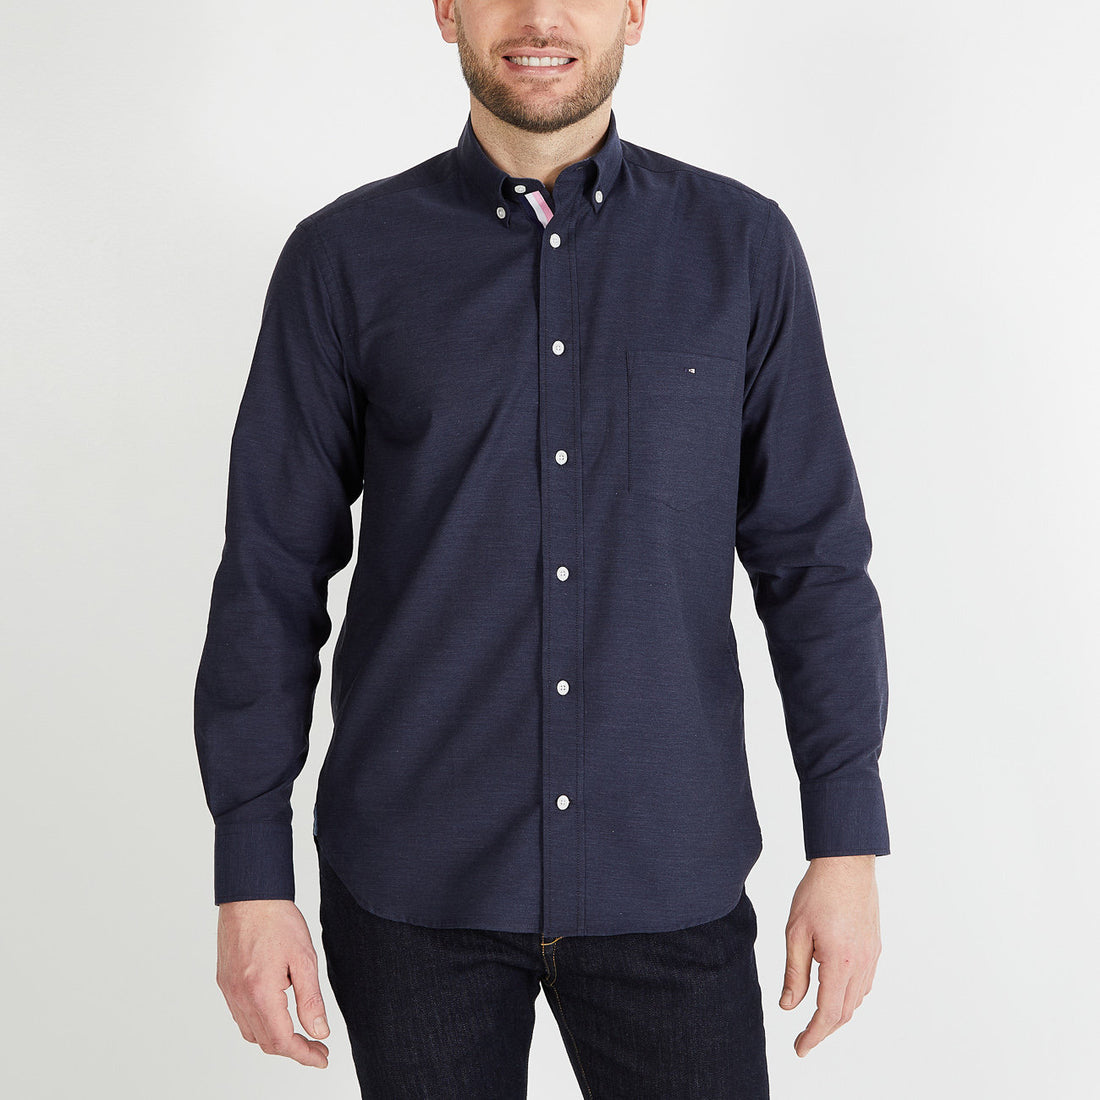 Dark Blue Shirt With Contrasting Elbow Patches_H23CHECL0032_BLF_01